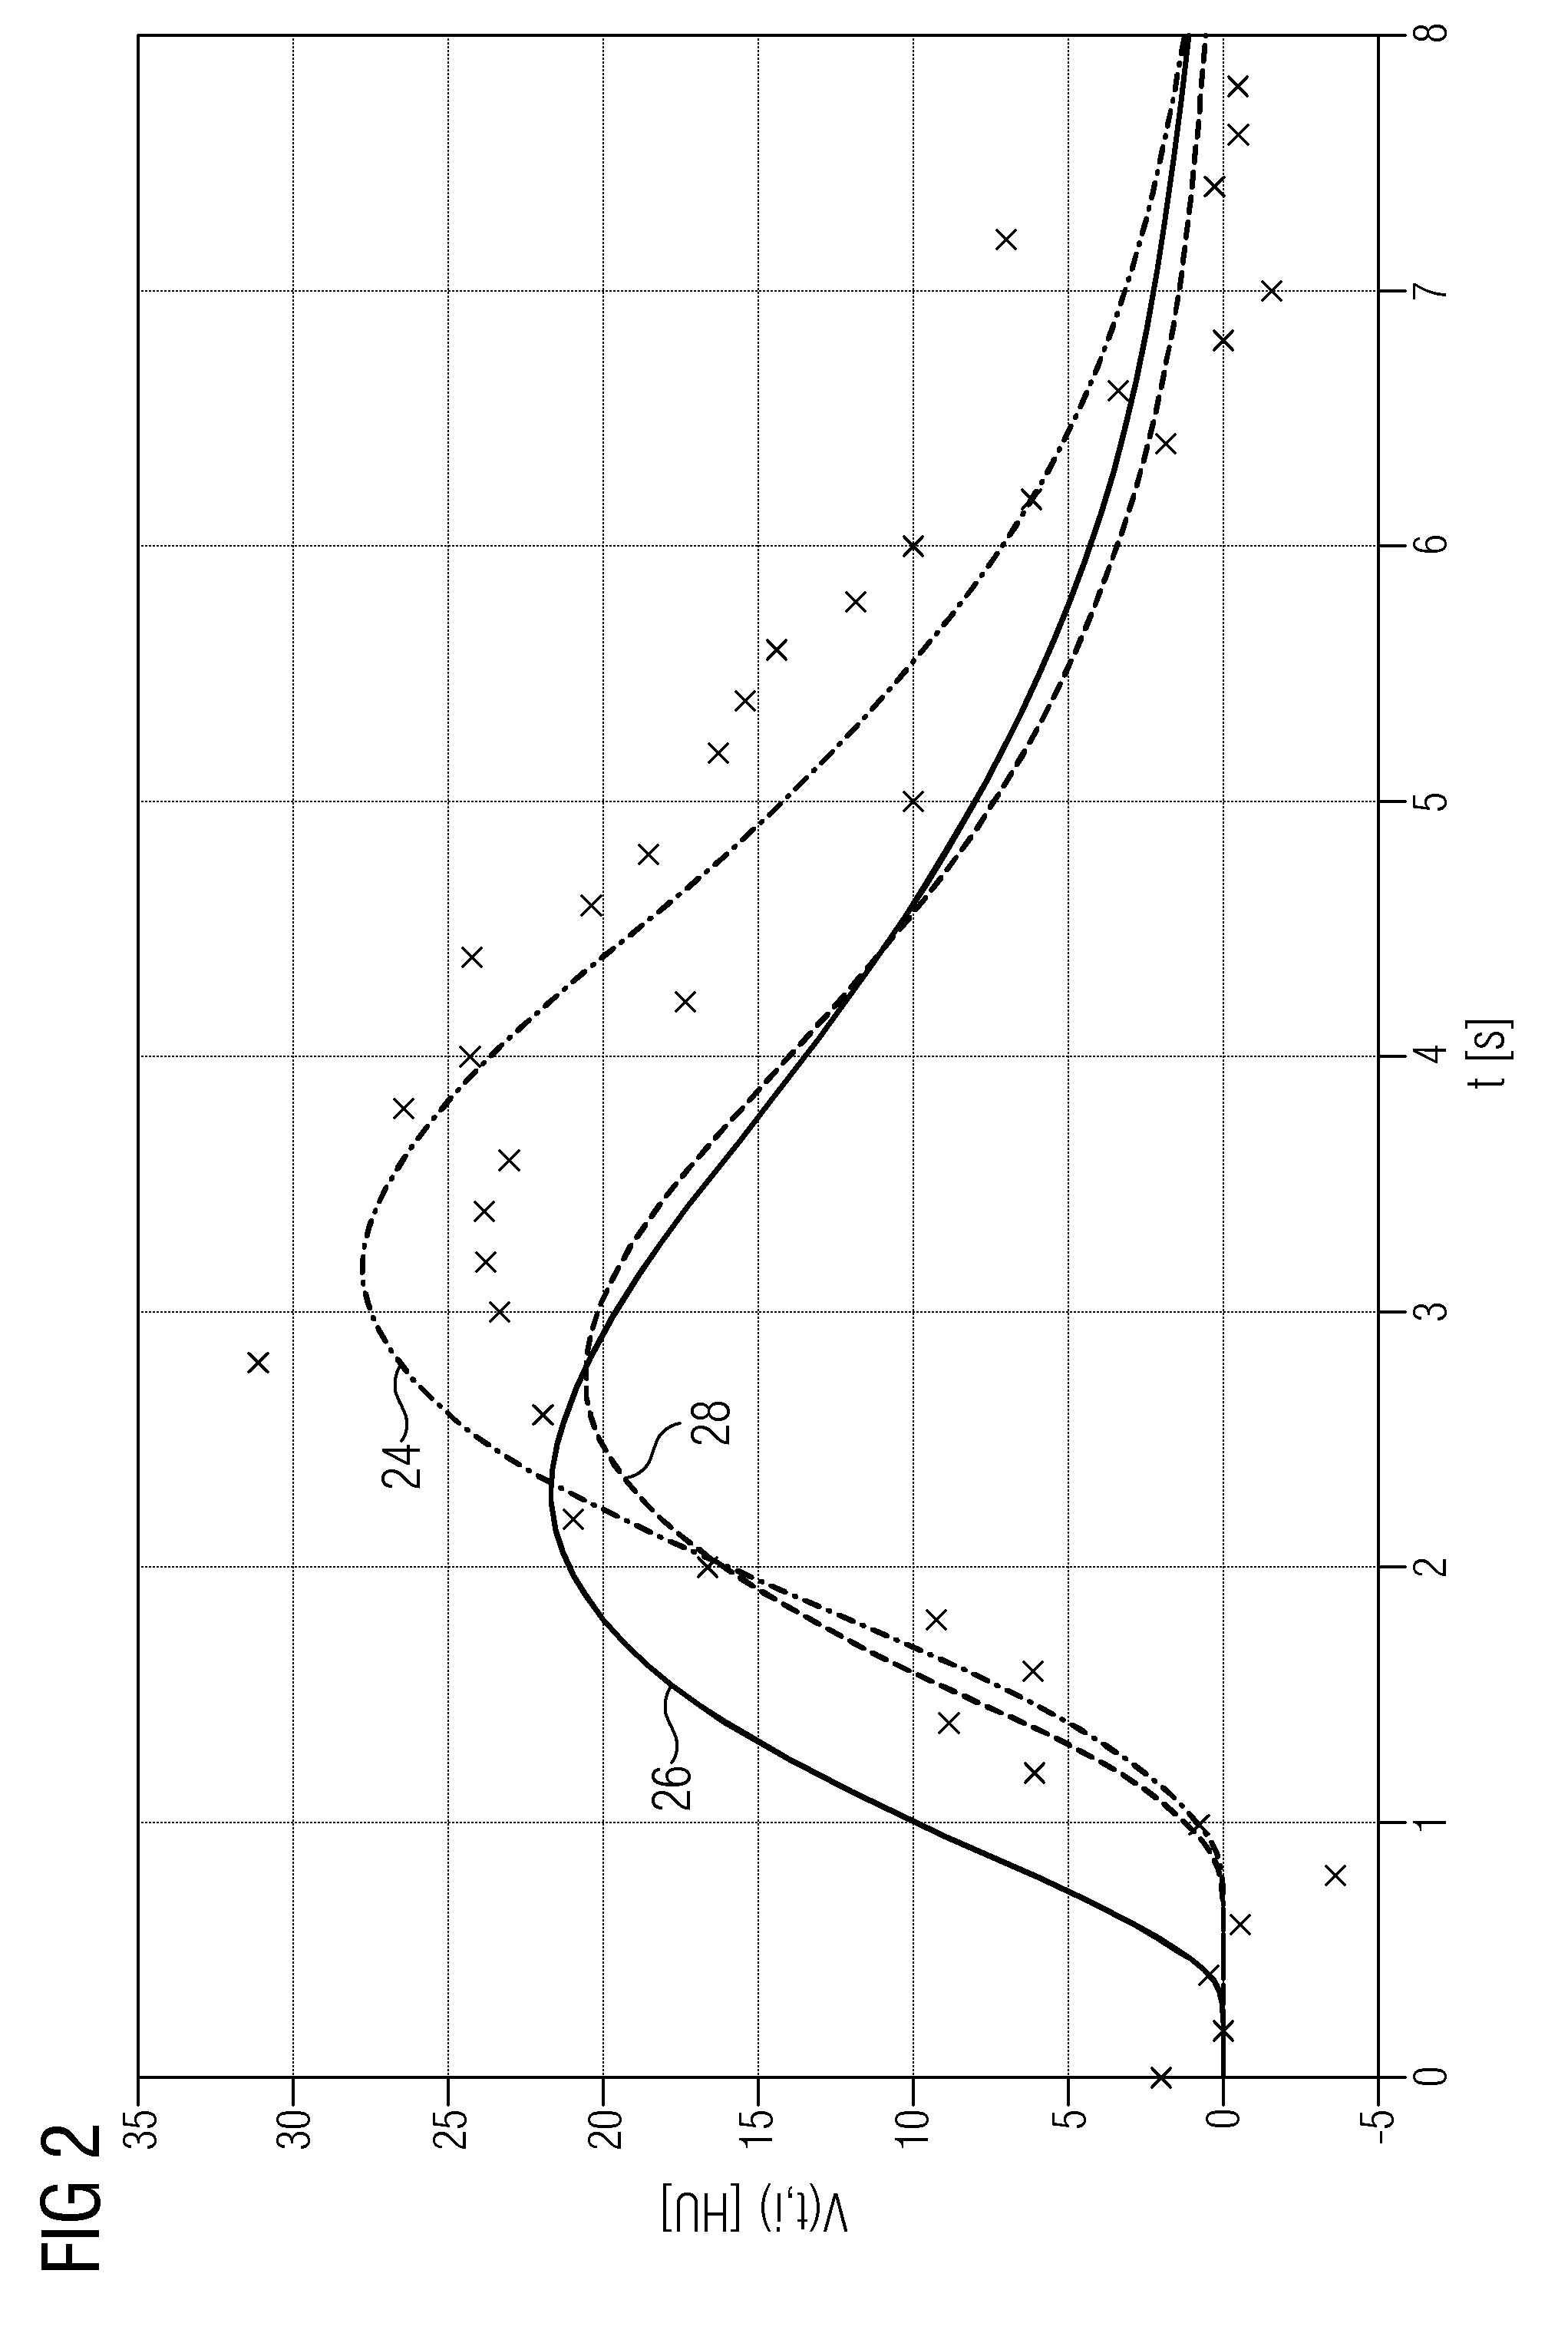 Computed-tomography system and method for determining volume information for a body